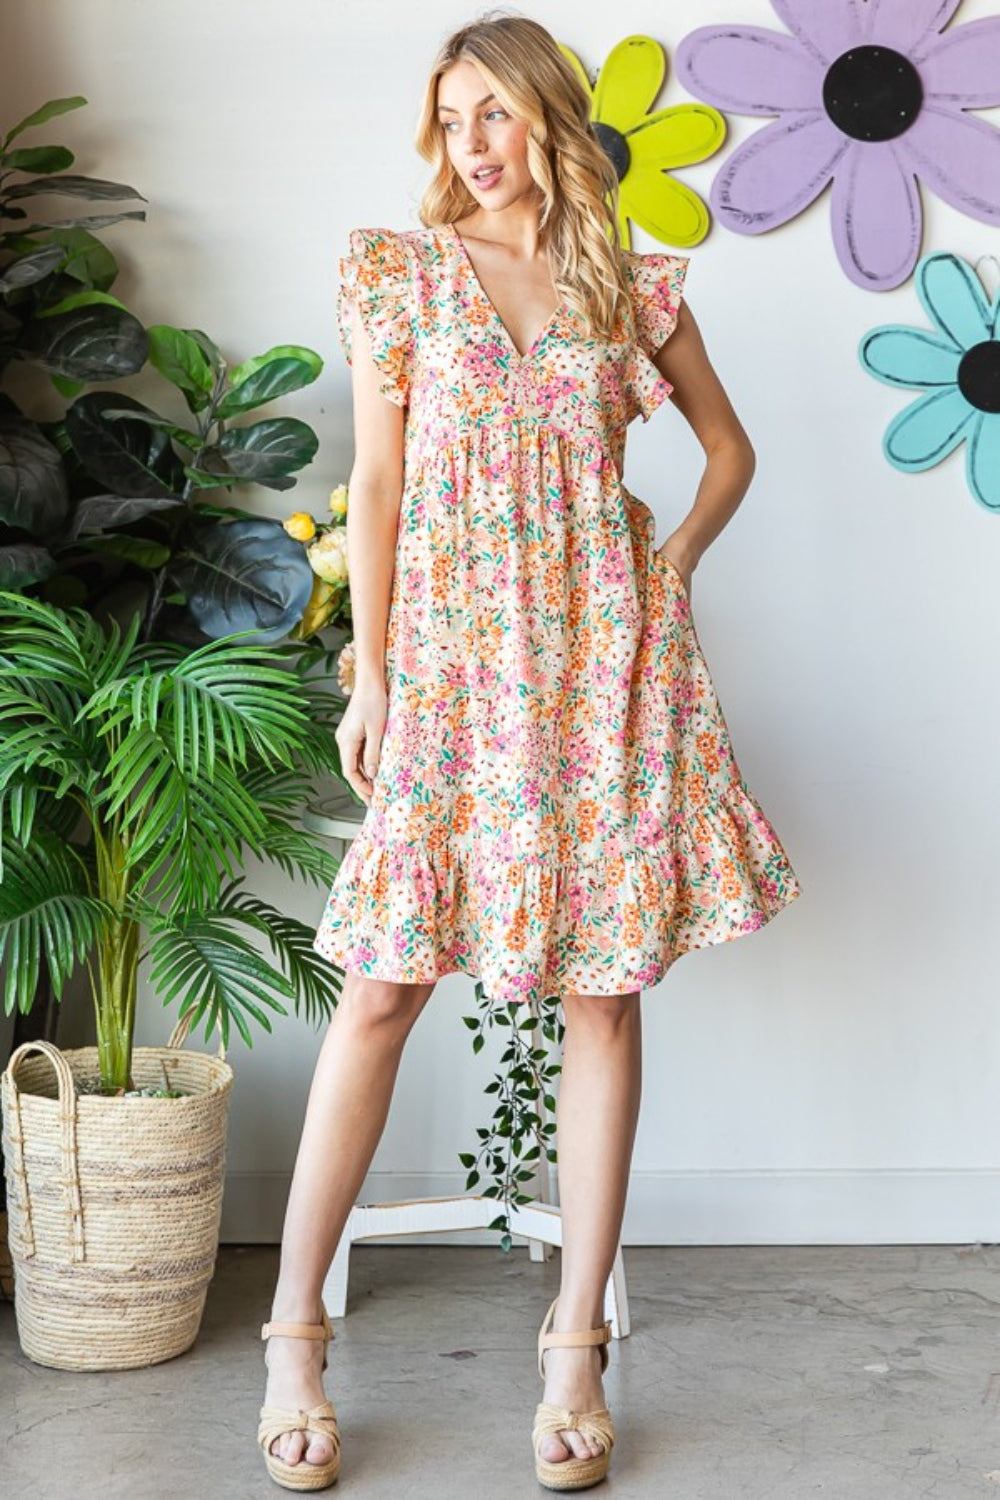 Introducing the Floral Ruffled V-Neck Dress. This stunning dress combines feminine elegance with a touch of playfulness. The floral pattern adds a romantic and vibrant flair, while the ruffled details create a whimsical and graceful look.